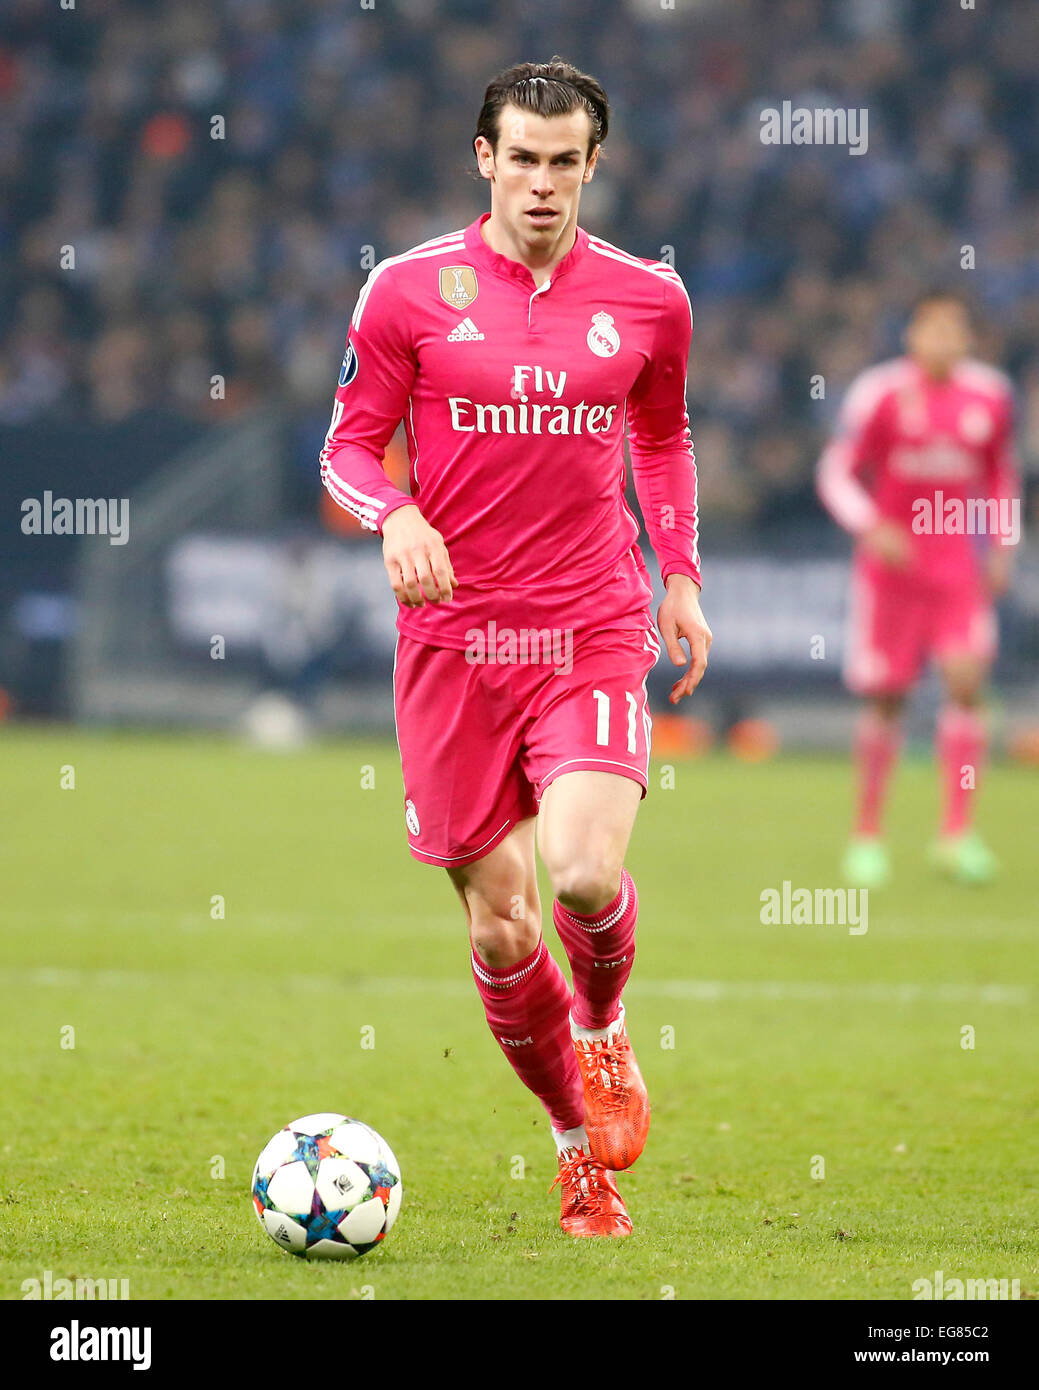 Gelsenkirchen, Germany. 18th Feb, 2015. Gareth Bale (Real Madrid) during  the Champions League match between FC Schalke 04 and Real Madrid, Veltins  Arena in Gelsenkirchen on February 18., 2015. Credit: dpa picture